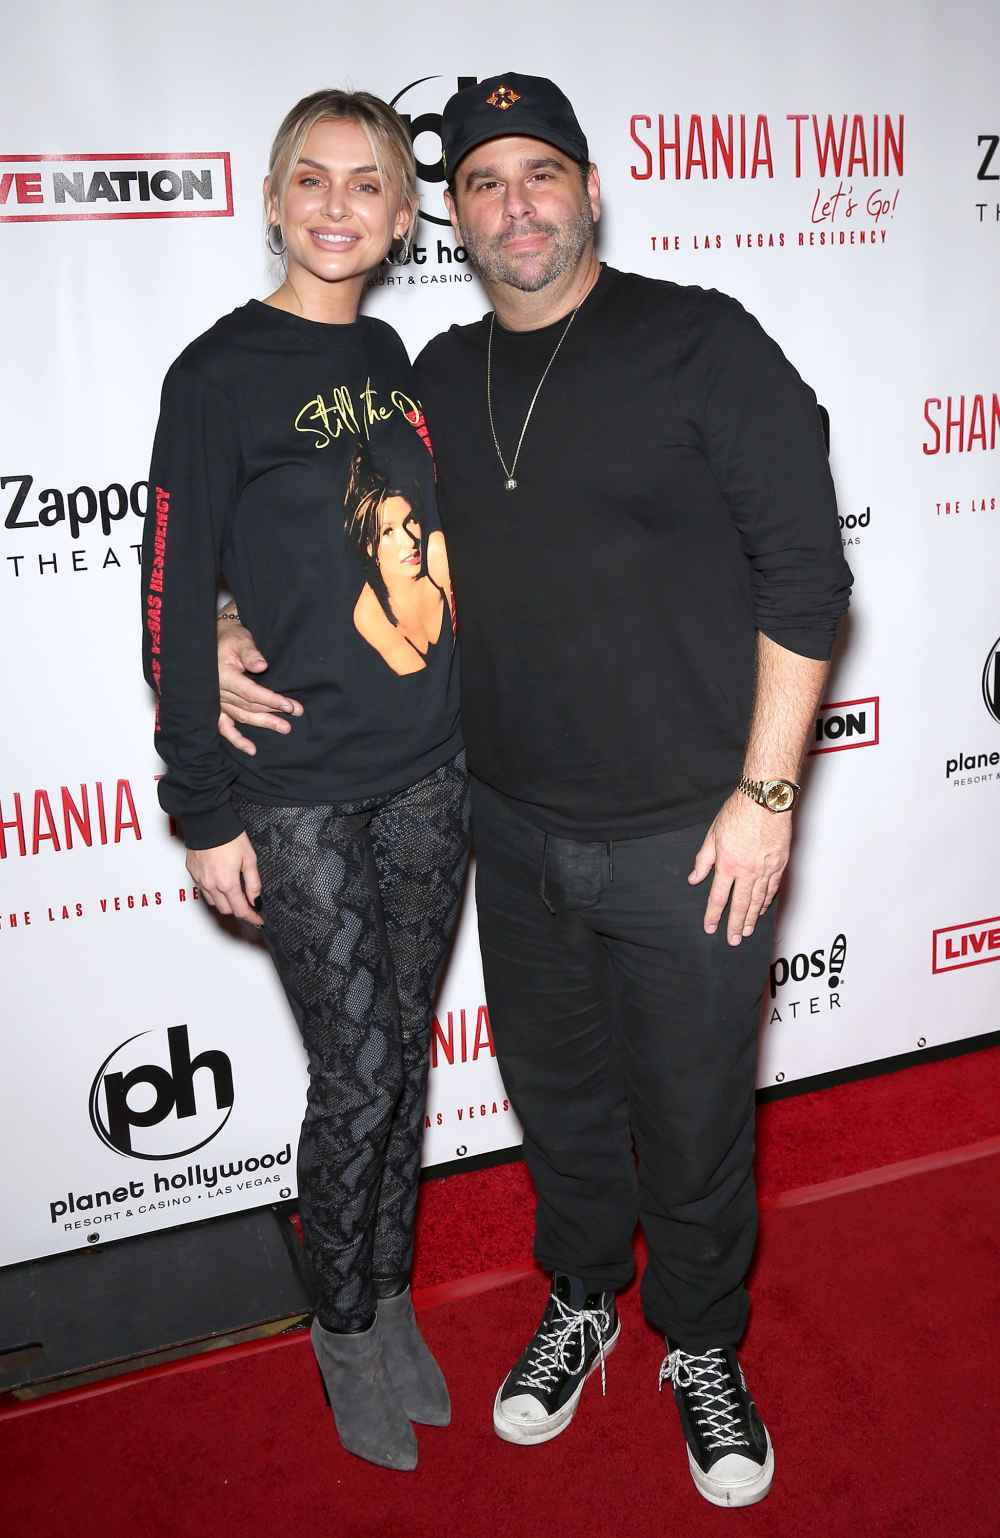 'Vanderpump Rules' Star Lala Kent Deletes Photos of Fiance Randall Emmett on Instagram, Says Her Life Is a 'Mess'